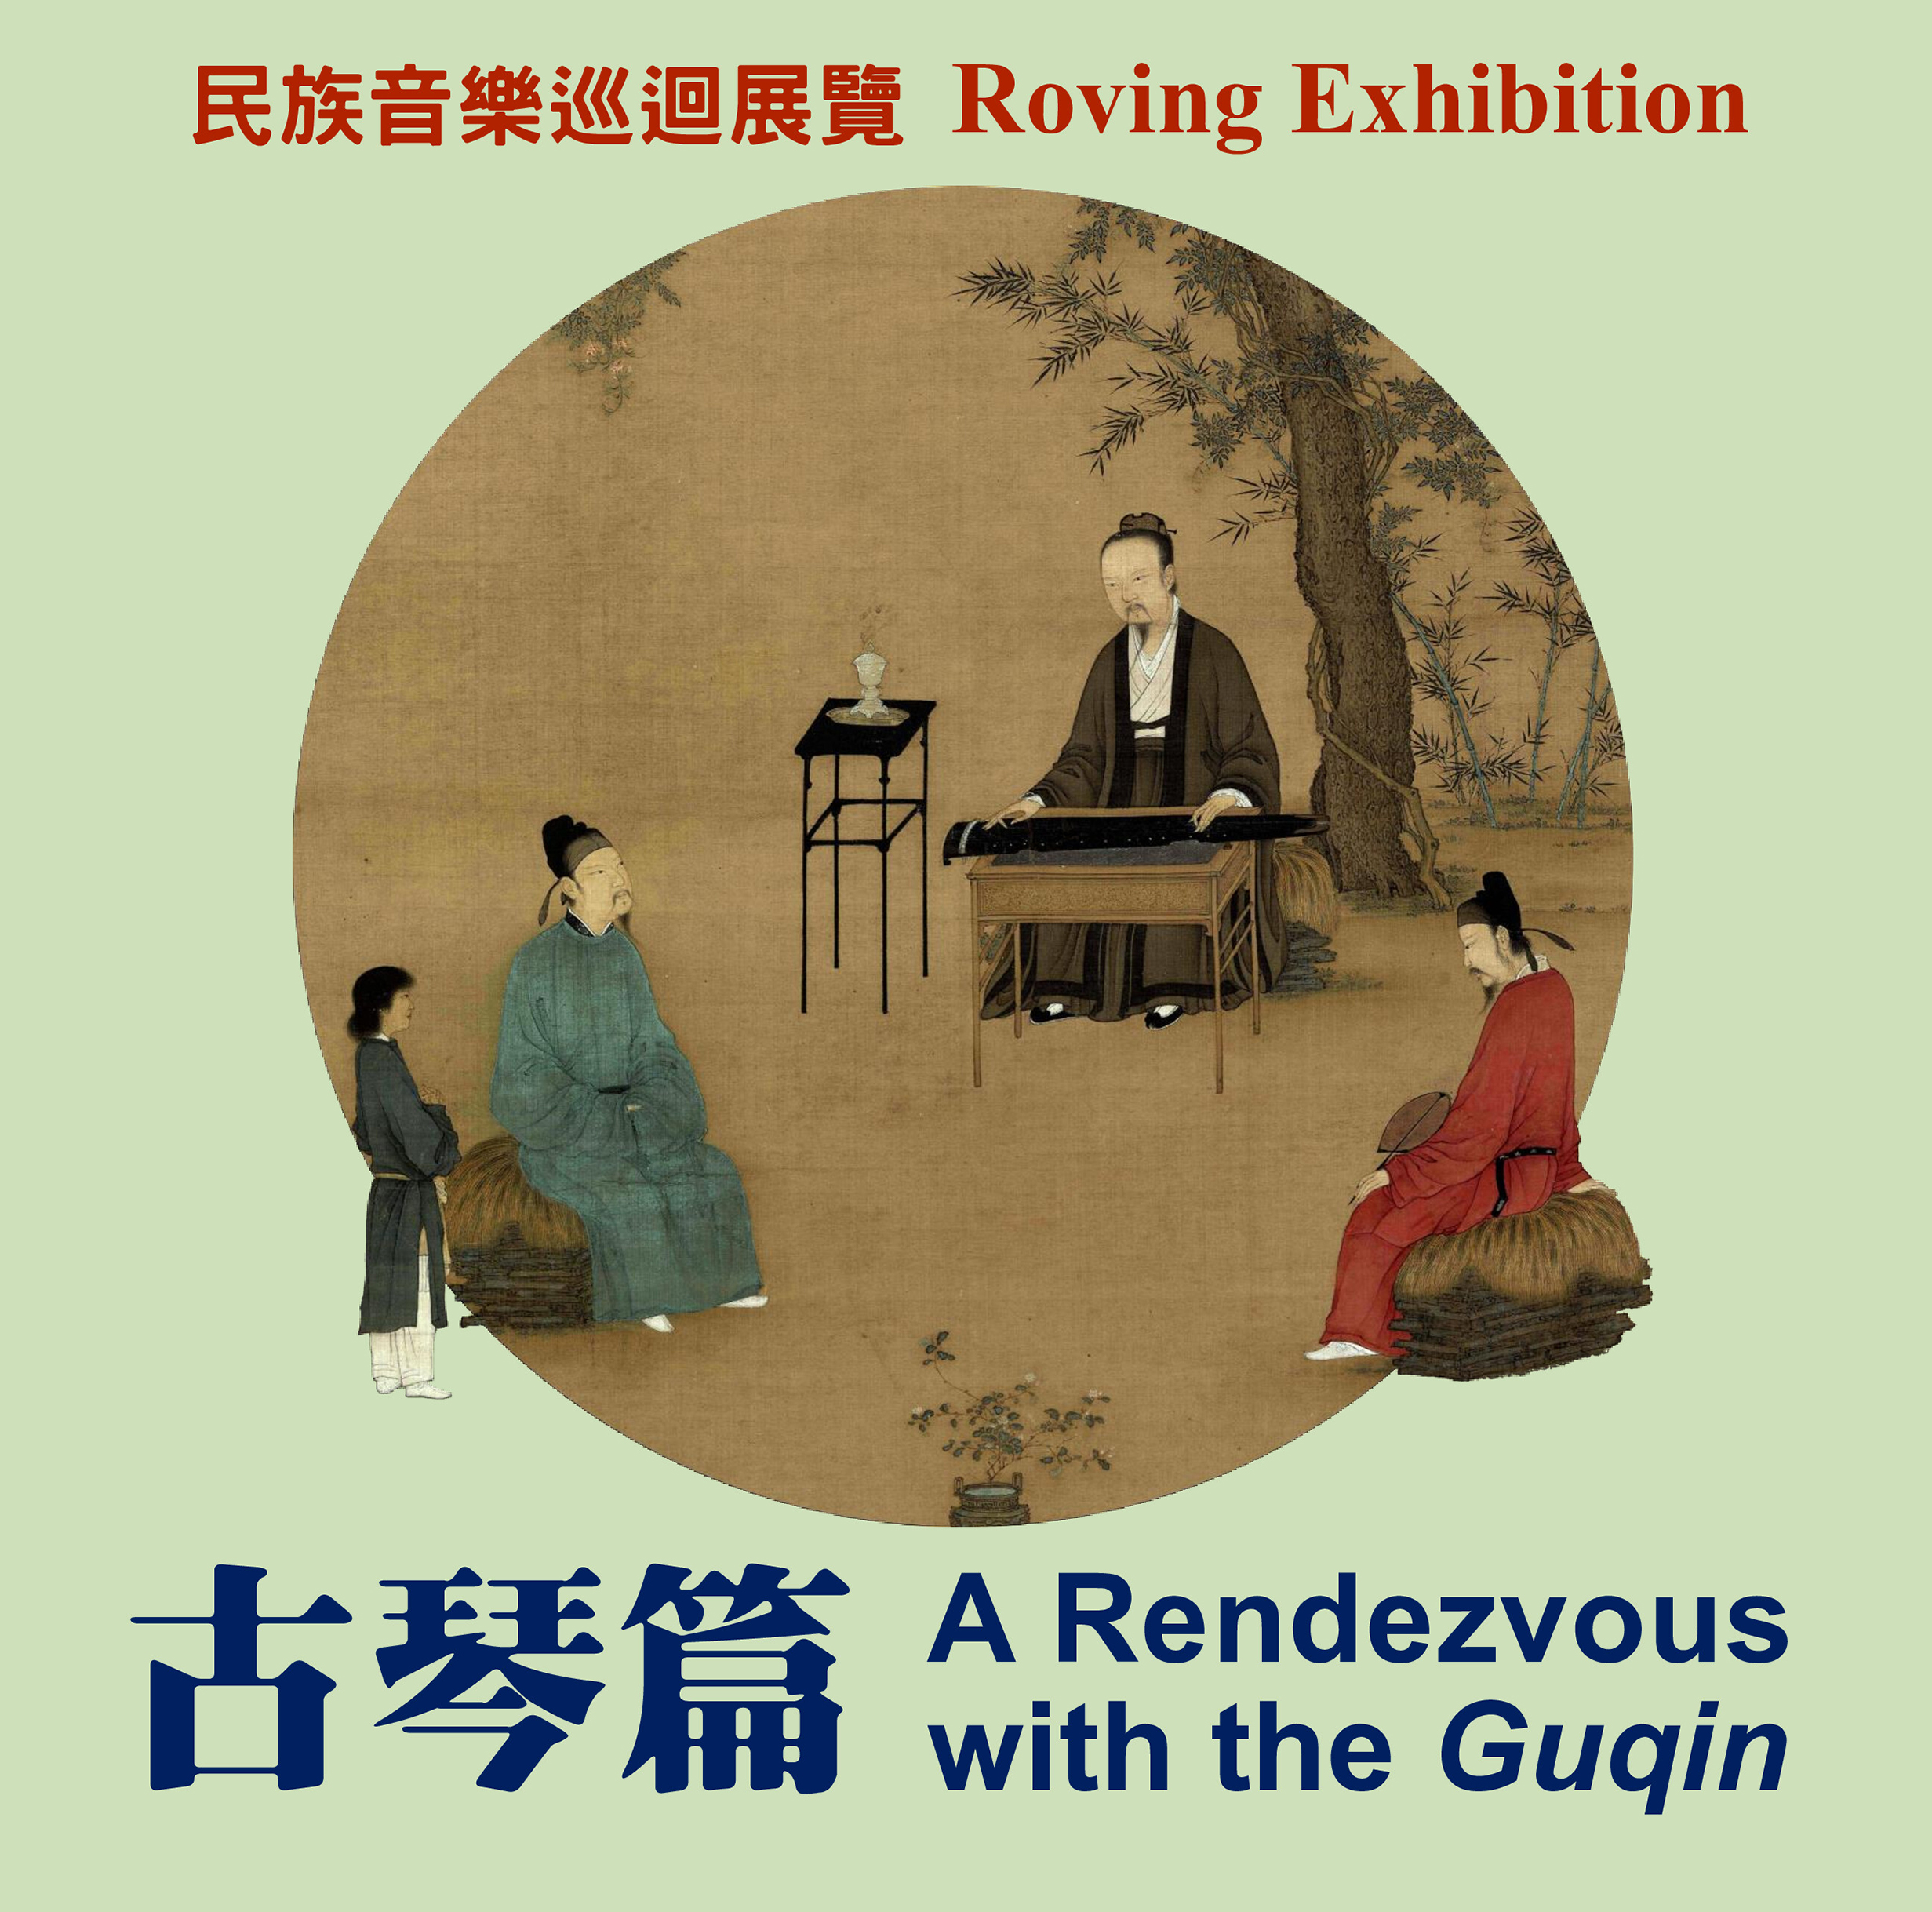 Roving Exhibition on "A Rendezvous with the Guqin"